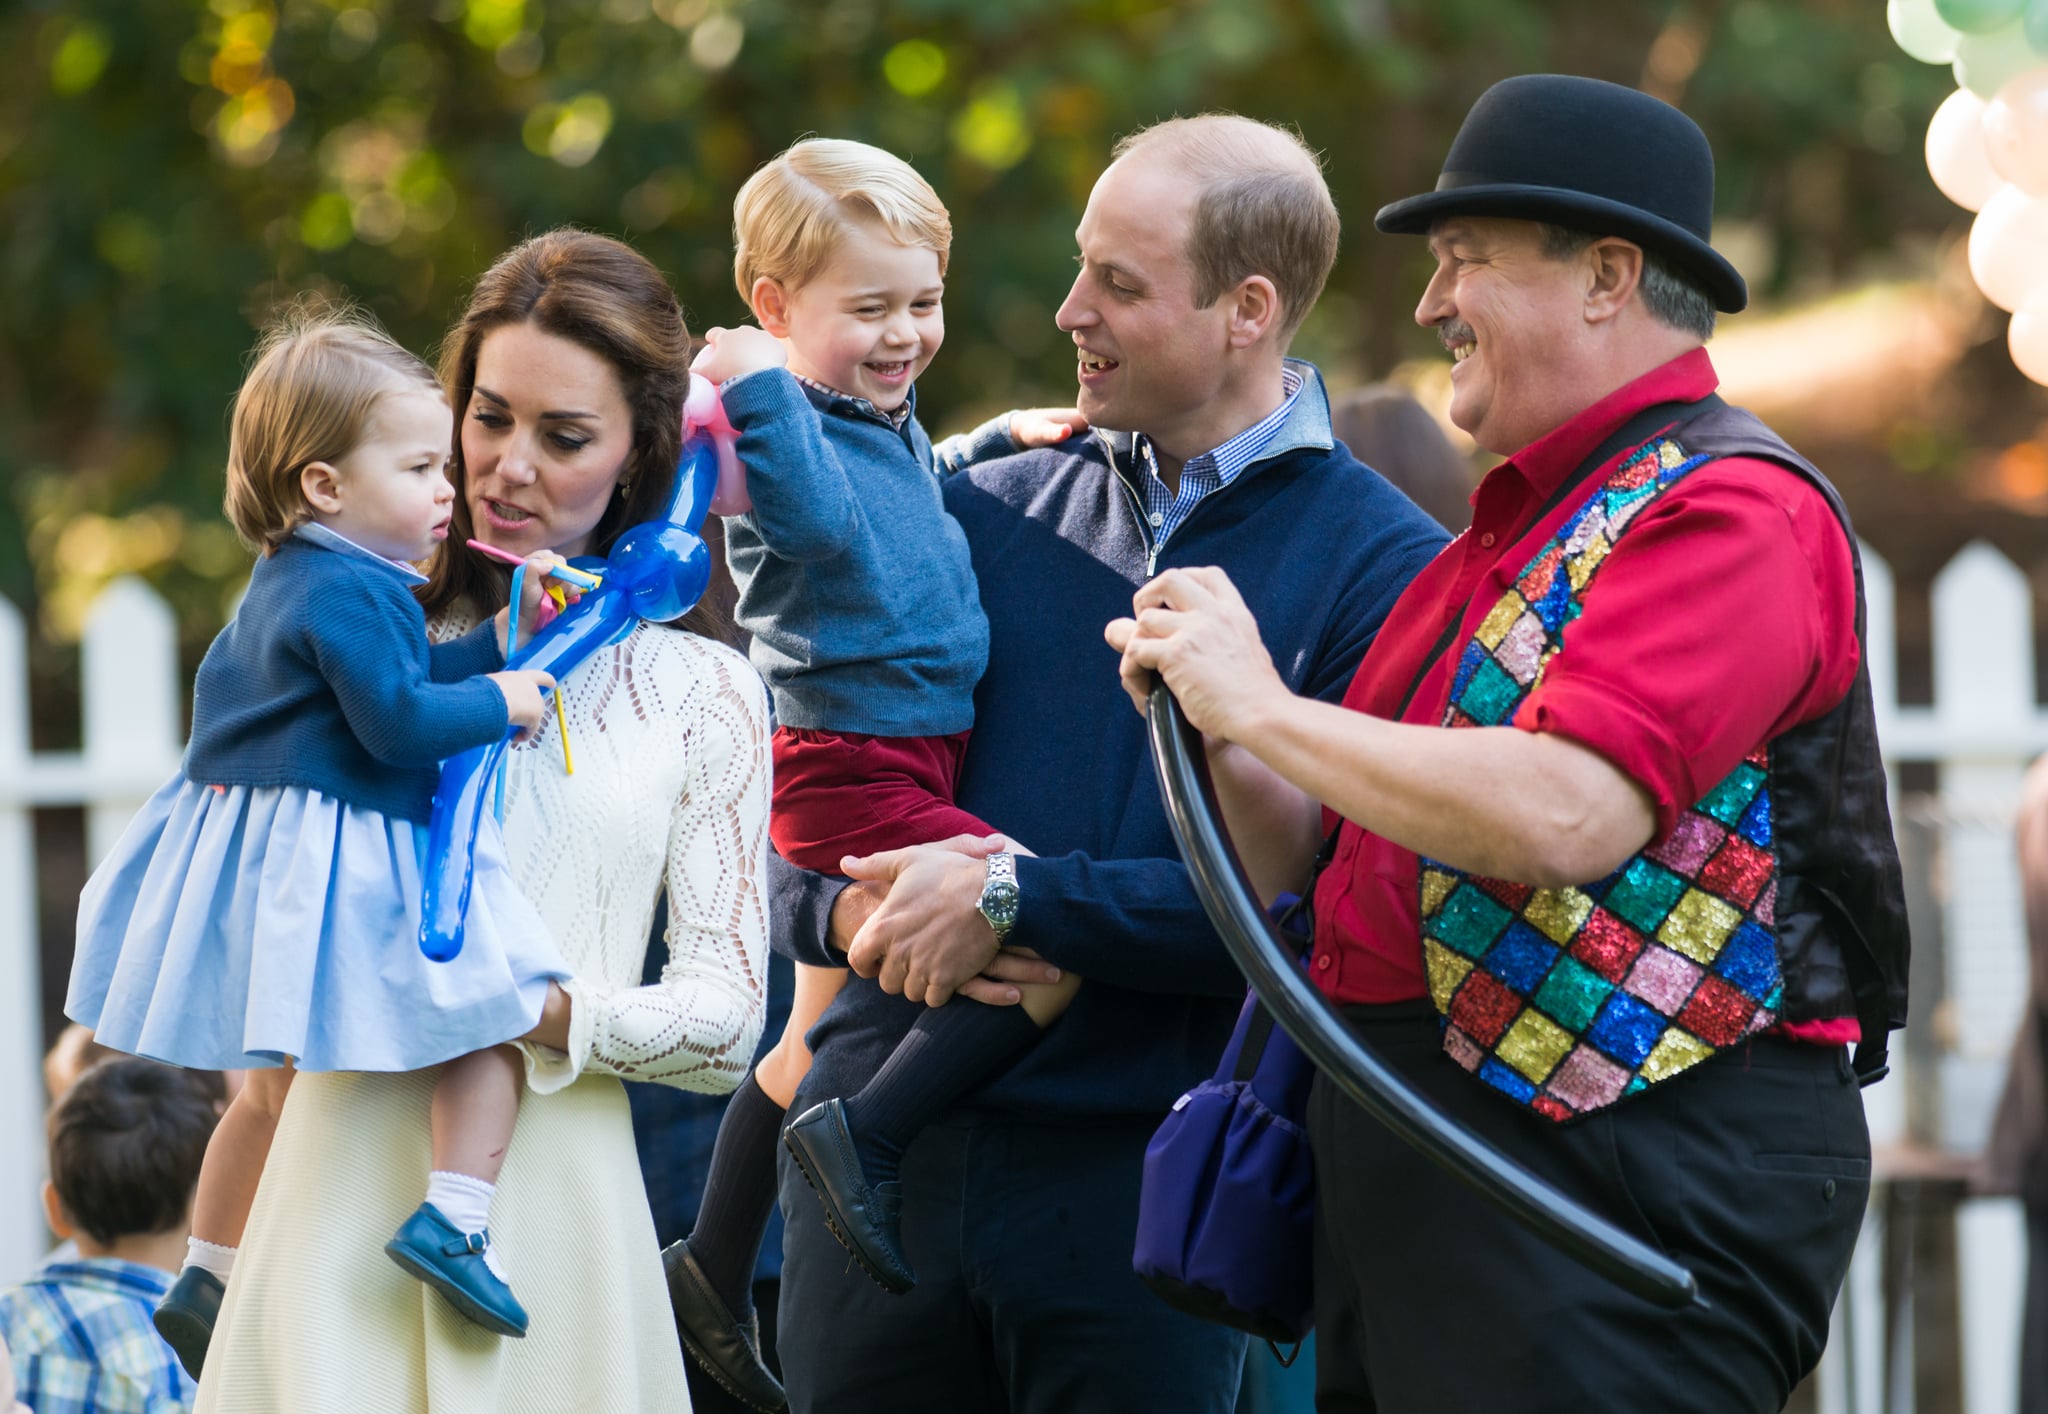 VICTORIA, BC - SEPTEMBER 29:  (NO UK SALES FOR 28 DAYS) Prince William, Duke of Cambridge, Catherine, Duchess of Cambridge, Prince George of Cambridge and Princess Charlotte of Cambridge attend a children's party for Military families during the Royal Tour of Canada on September 29, 2016 in Victoria, Canada.  (Photo by Pool/Sam Hussein/WireImage)